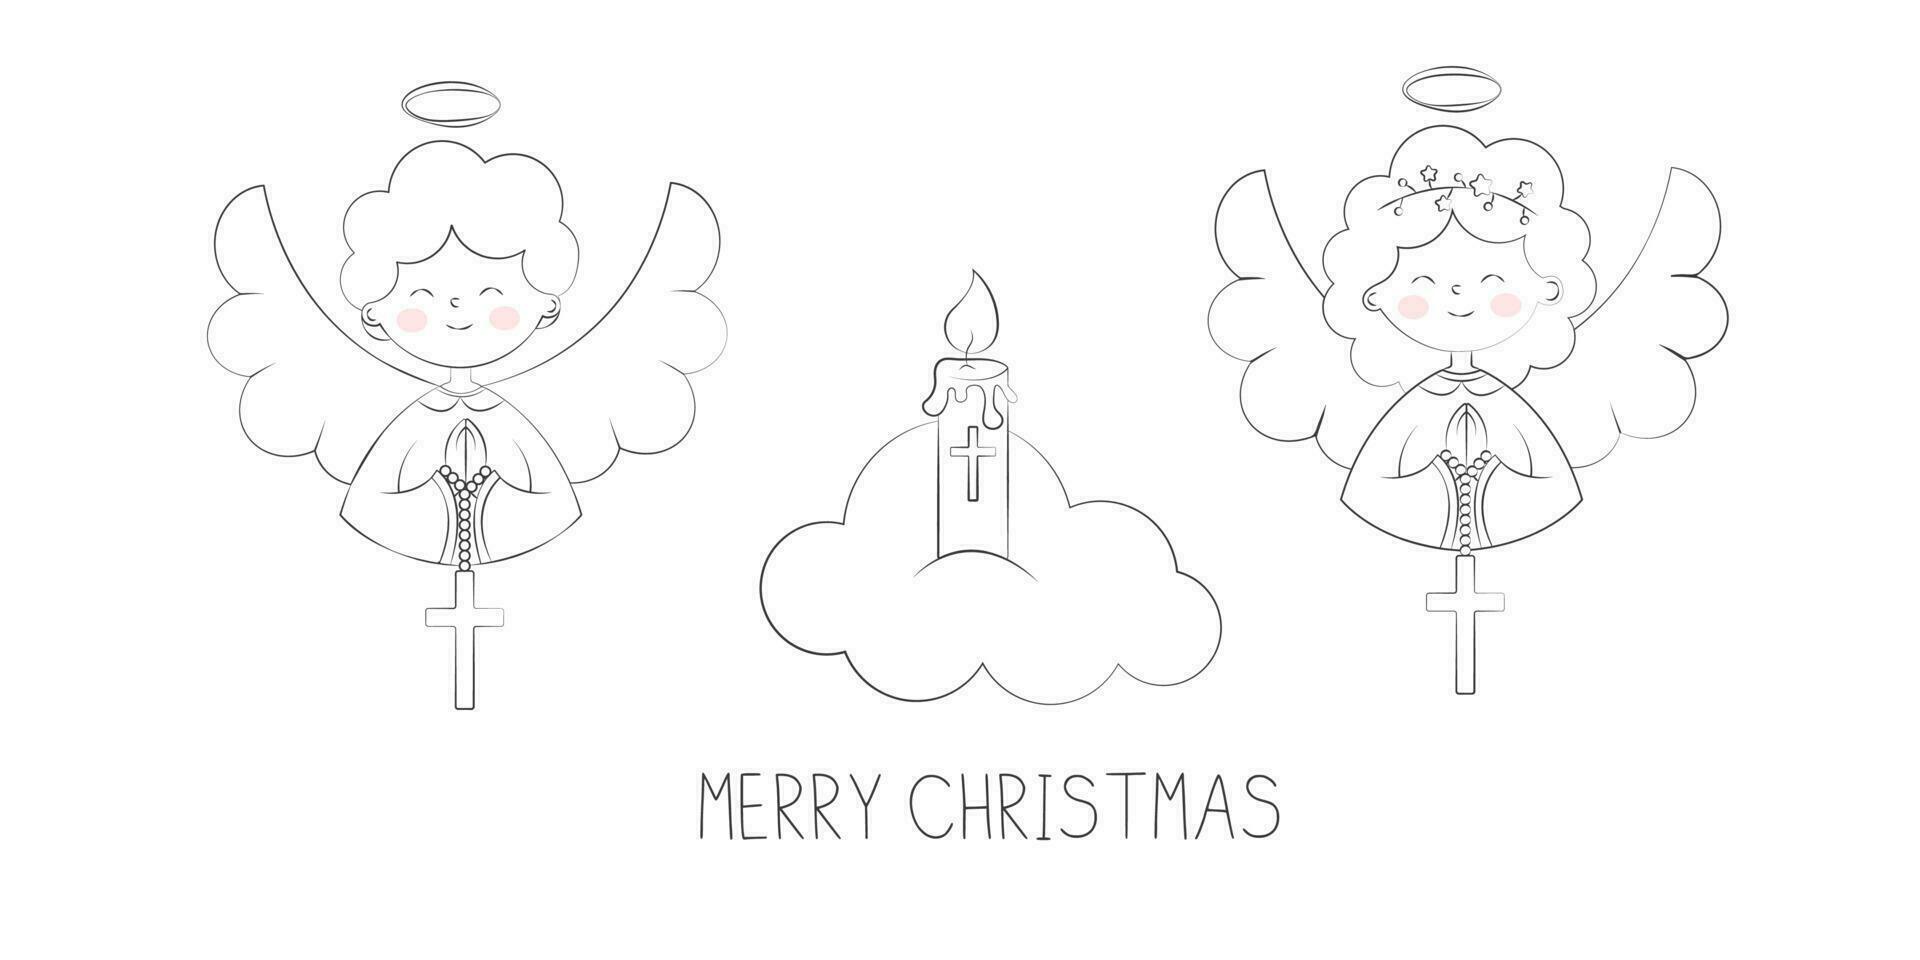 Cute Christmas Angels Boy and Girl Praying on Cloud Merry Christmas Greeting Vector Illustration in Doodle Style